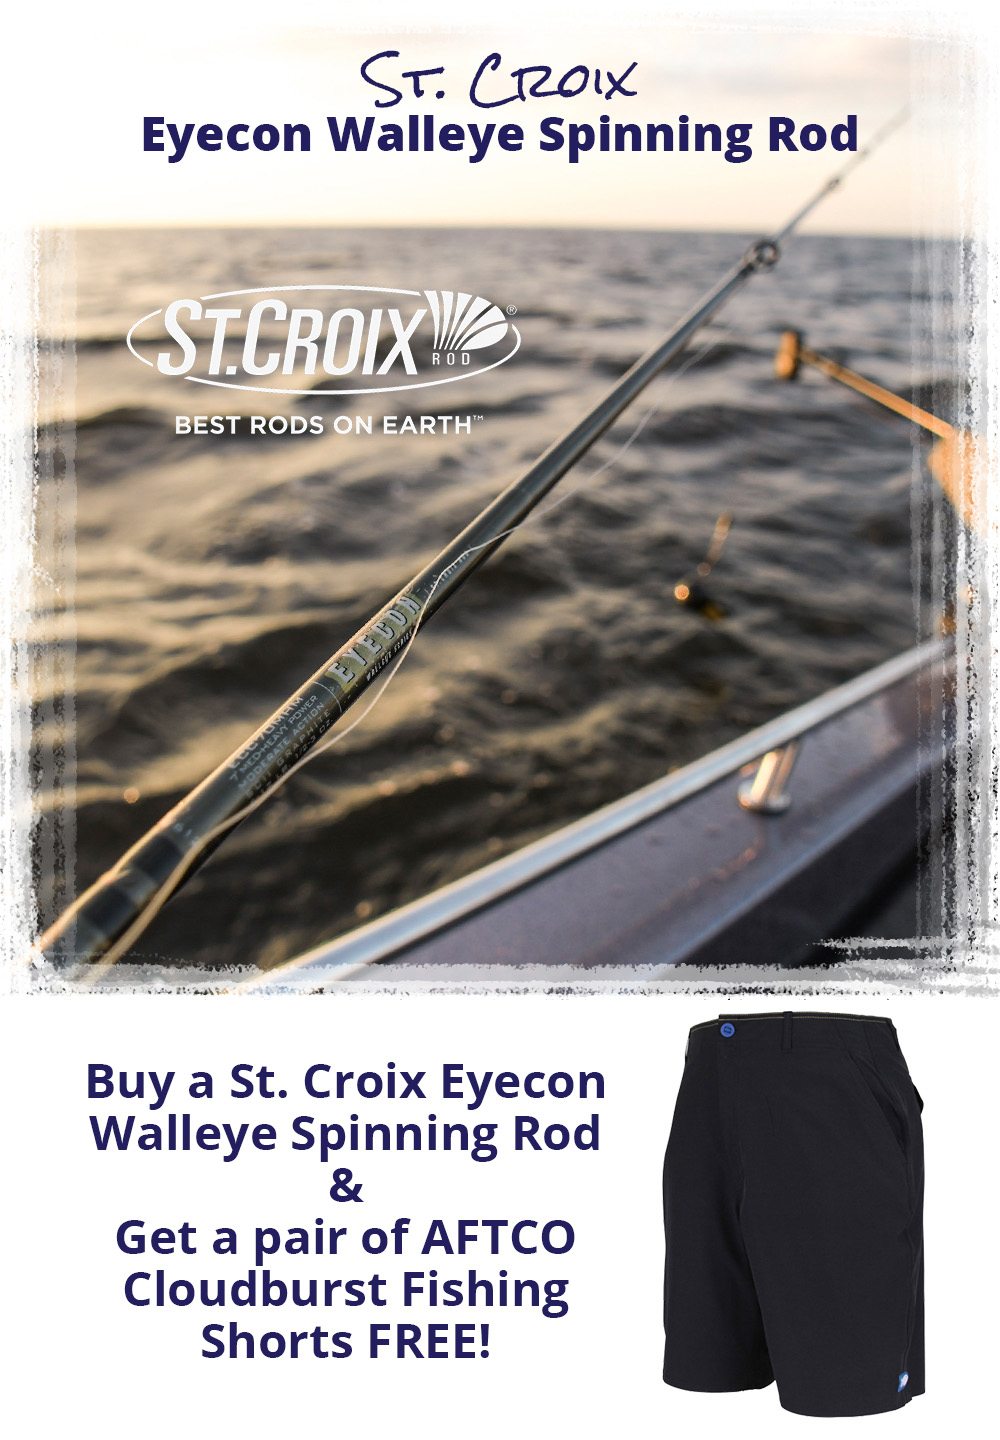 Get a free pair of AFTCO Cloudburst Fishing Shorts FREE when you buy a St. Croix Eyecon Walleye Spinning Rod!